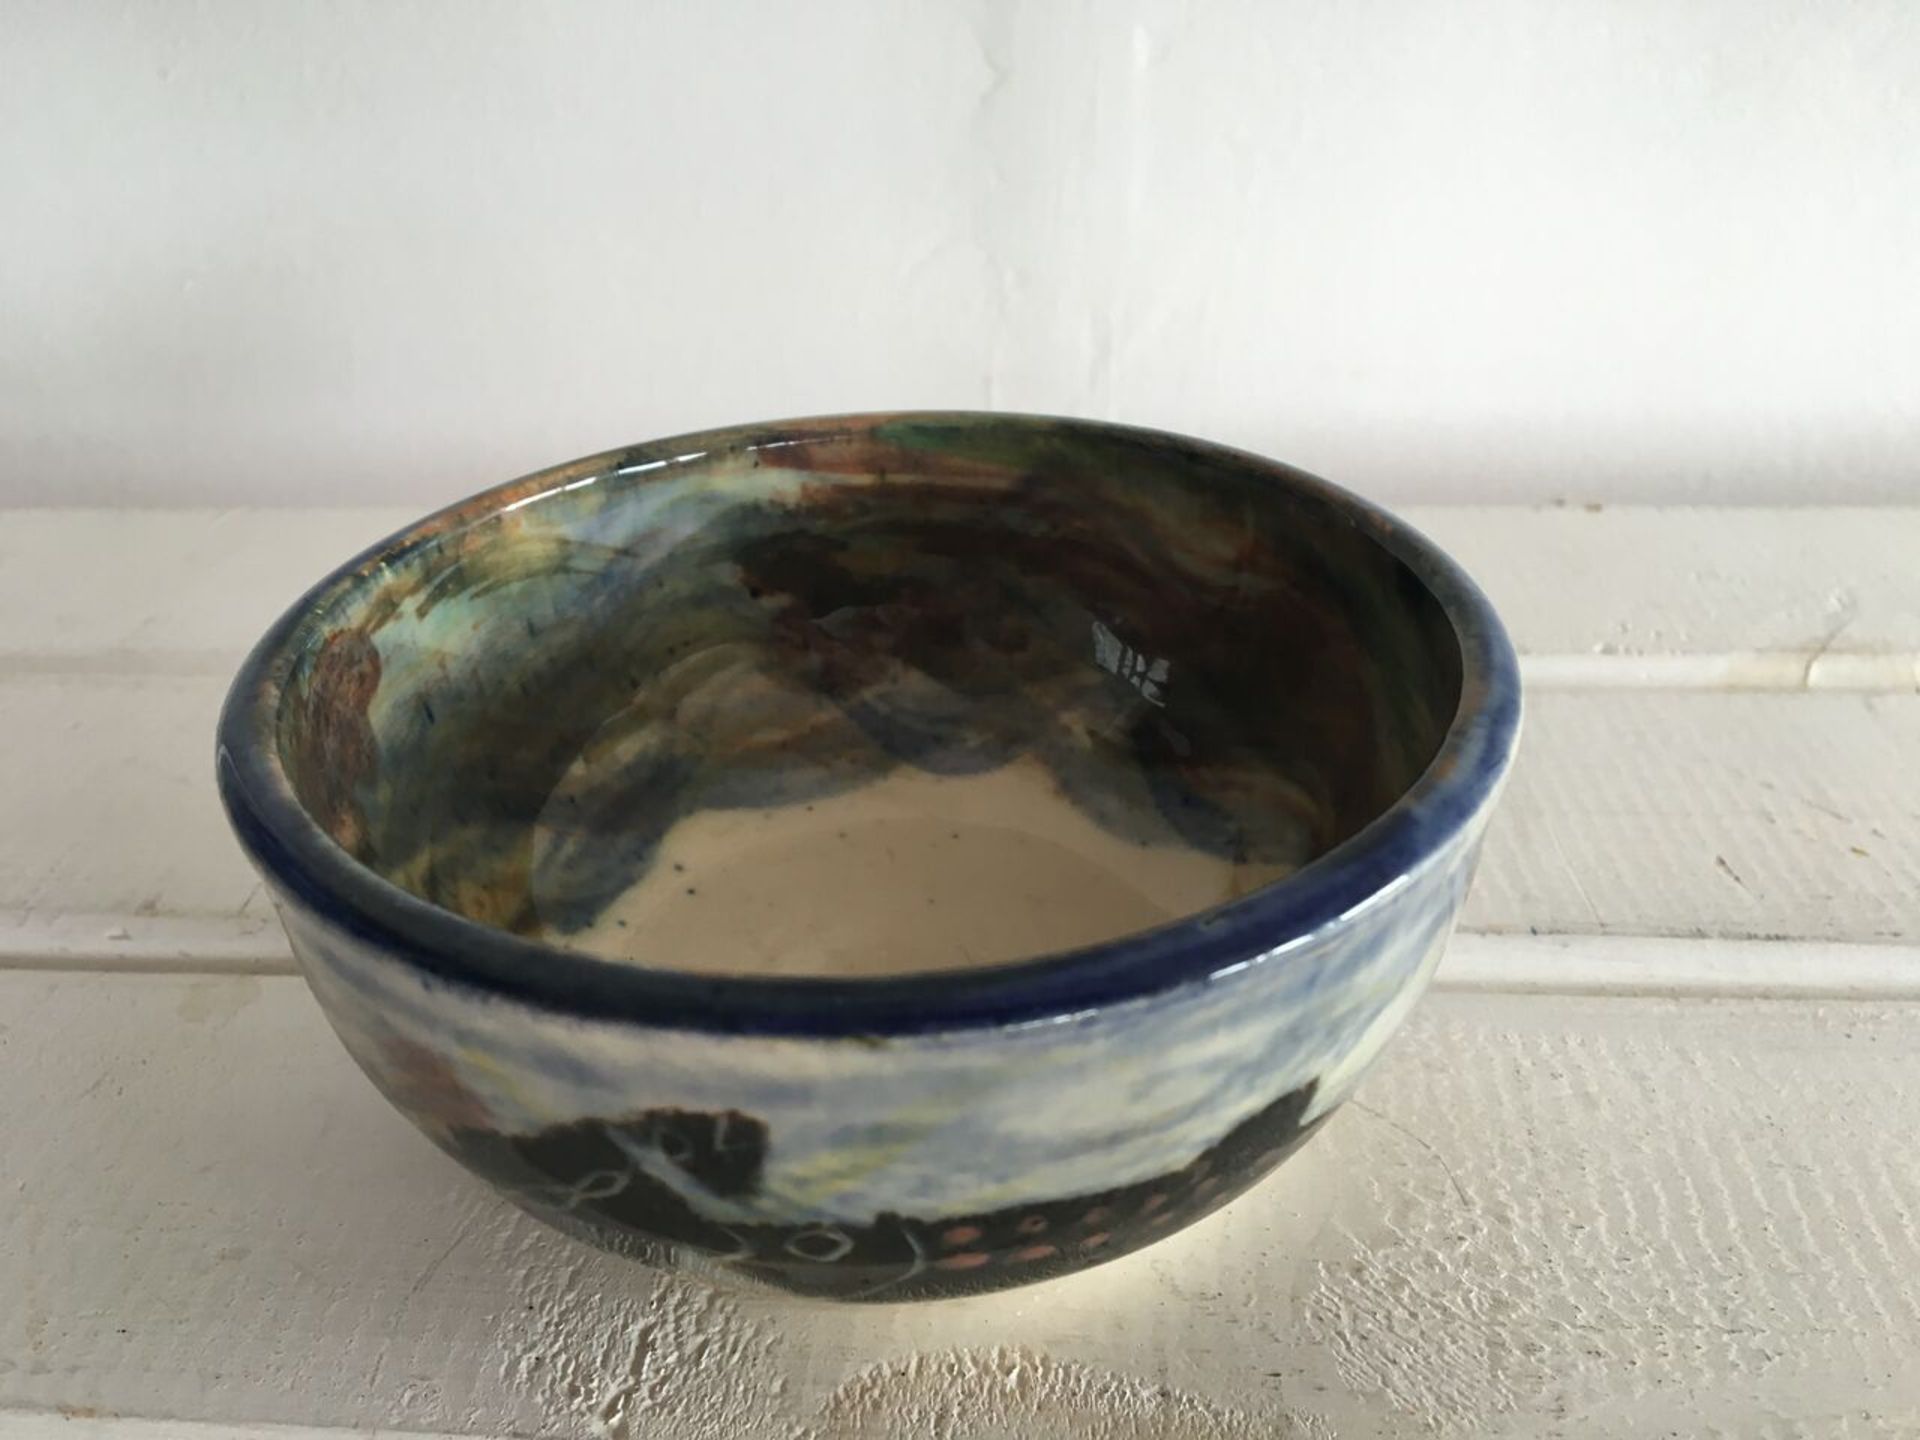 SIGNED GWILI POTTERY BOWL HAND DECORATED WITH FISH. NO OBVIOUS DAMAGE - 10CM DIAMETER. FREE UK - Image 3 of 3